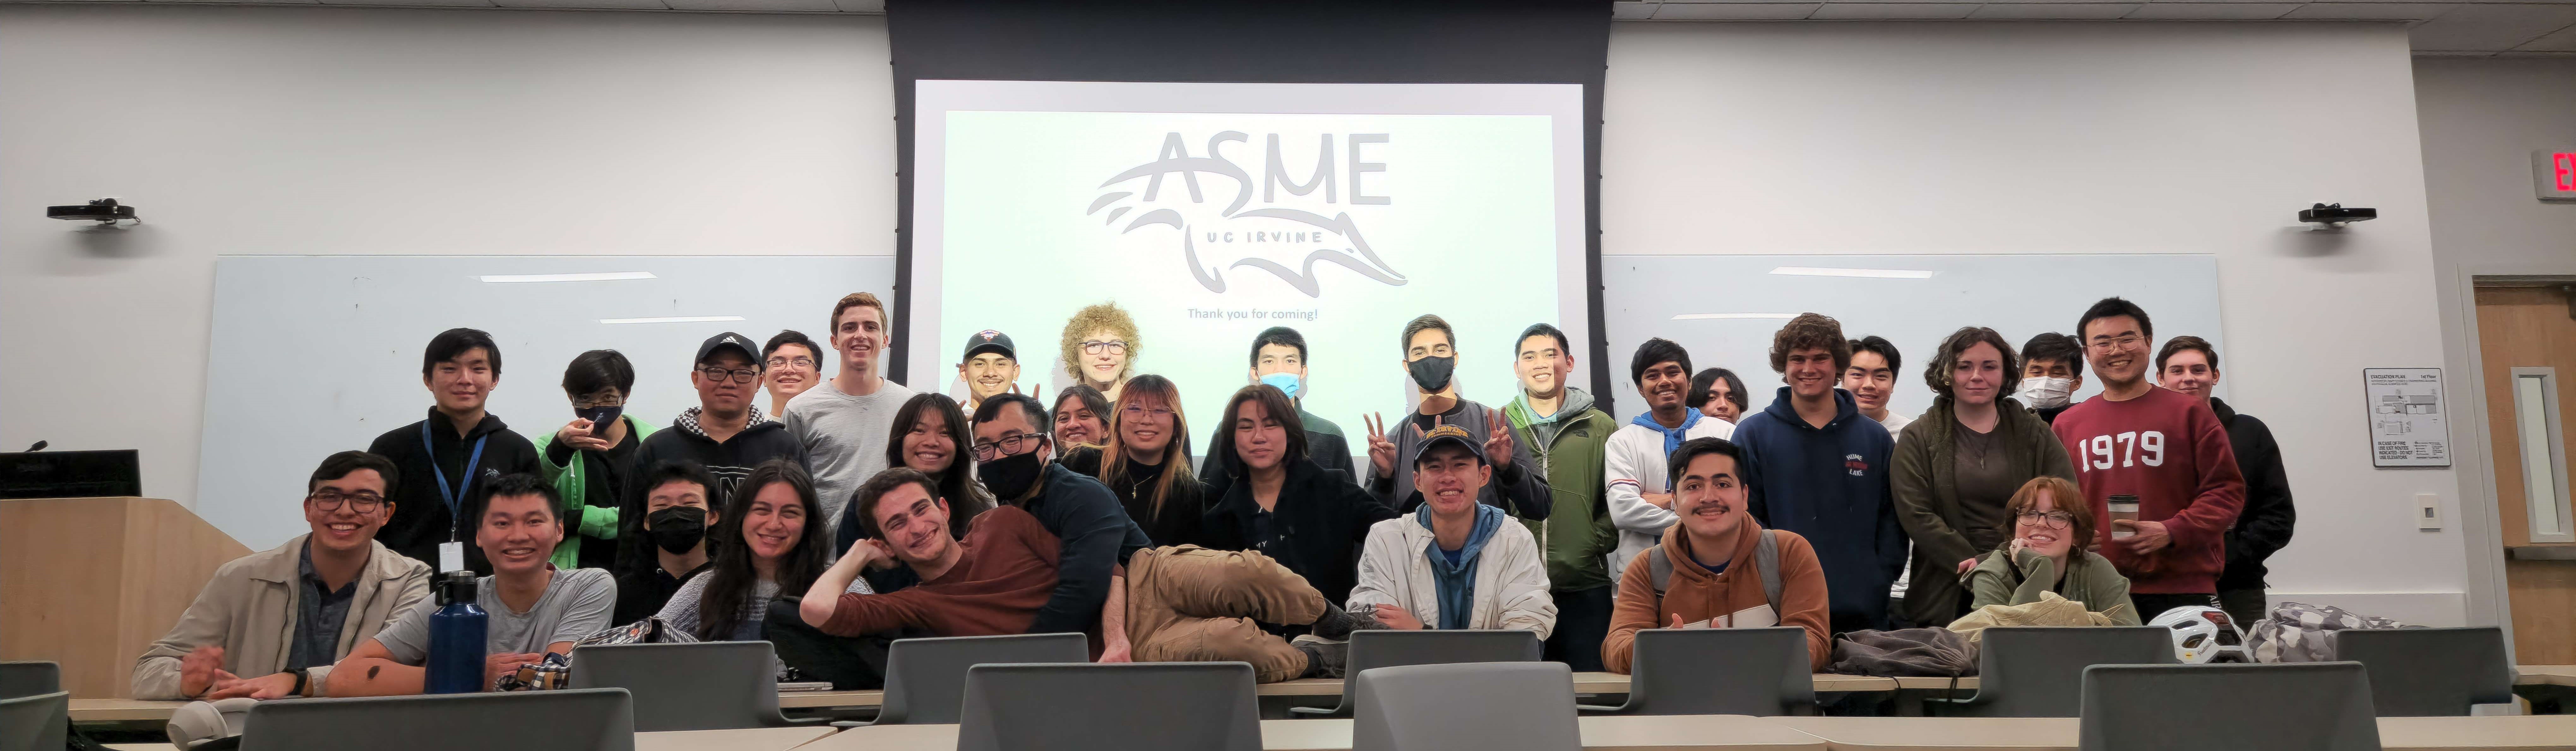 ASME and Friends